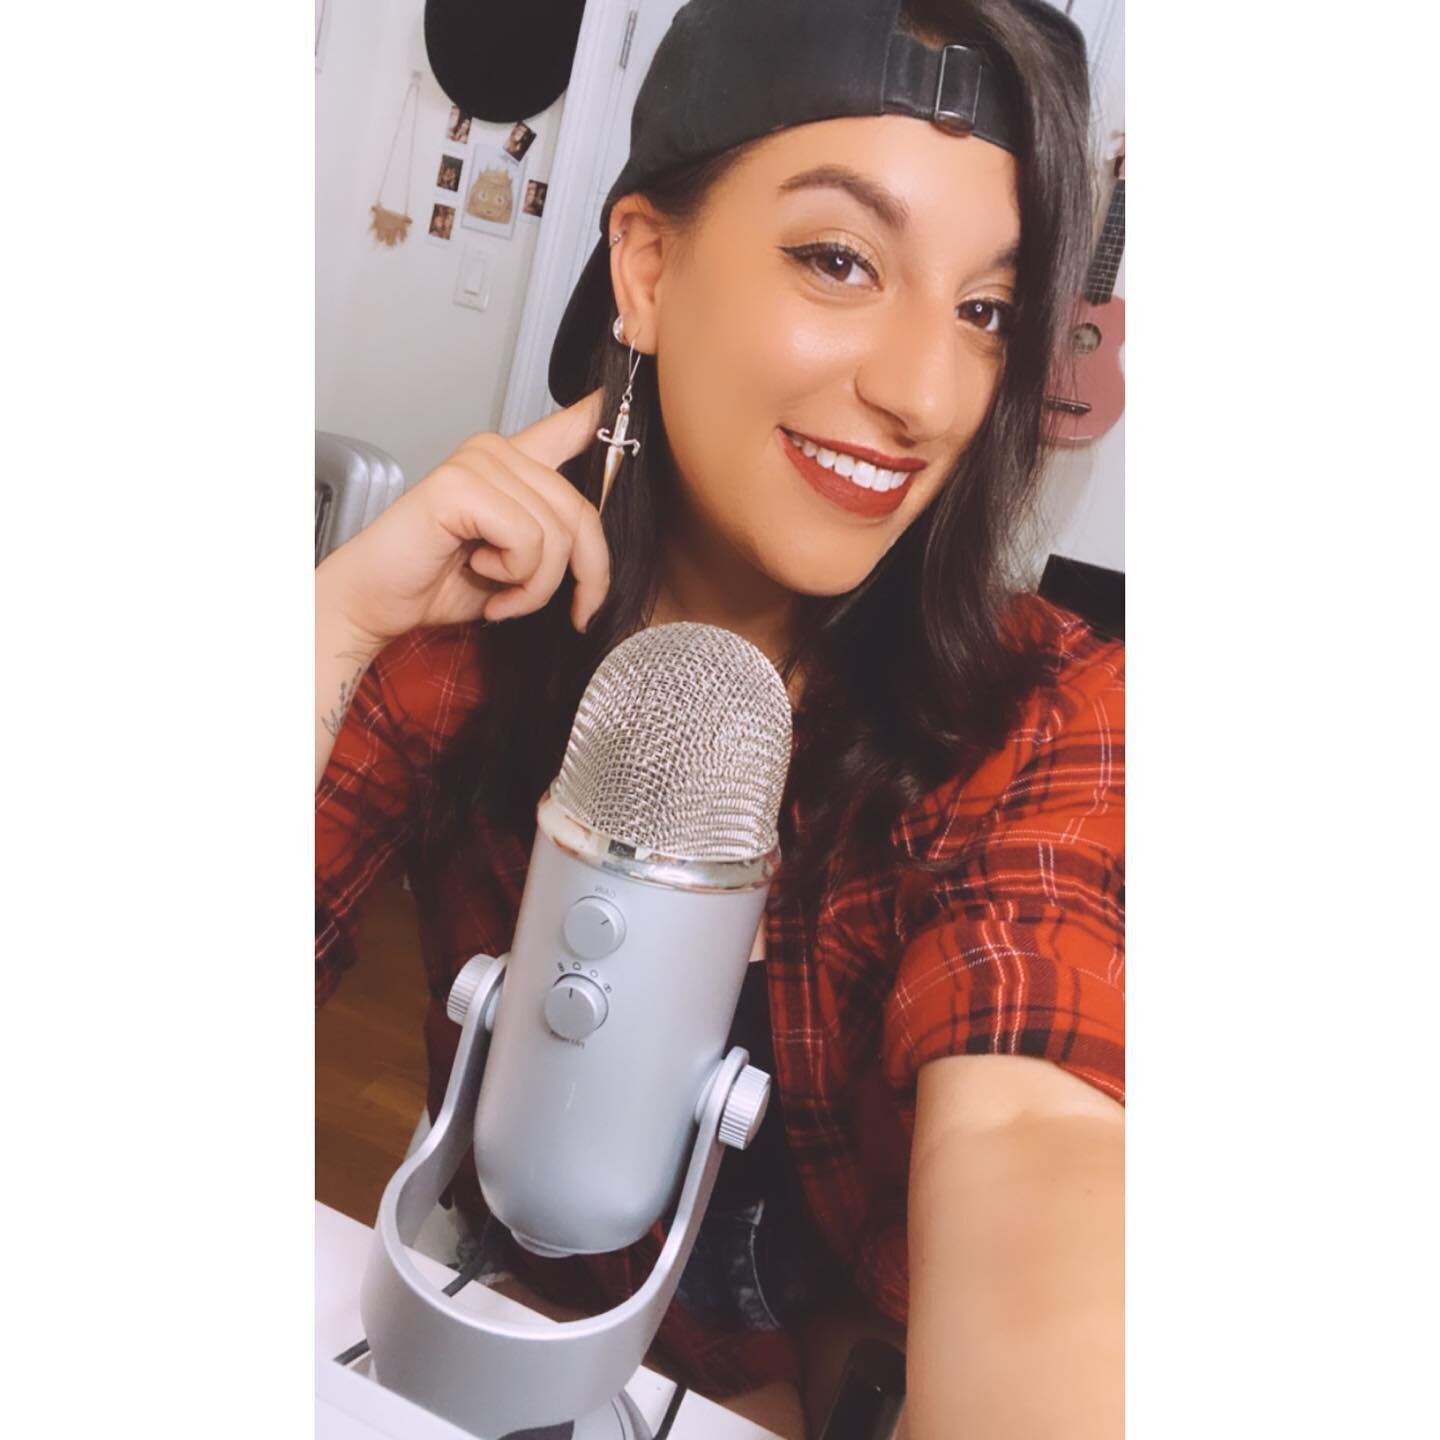 The ✨podcast selfie✨ has become a staple of my Monday, Wednesday, and Thursday nights 😂 @bbjuryduty brings so much joy into my life and we have gotten to make so many new friends in our little pocket of the internet who love our dumb shows as much a